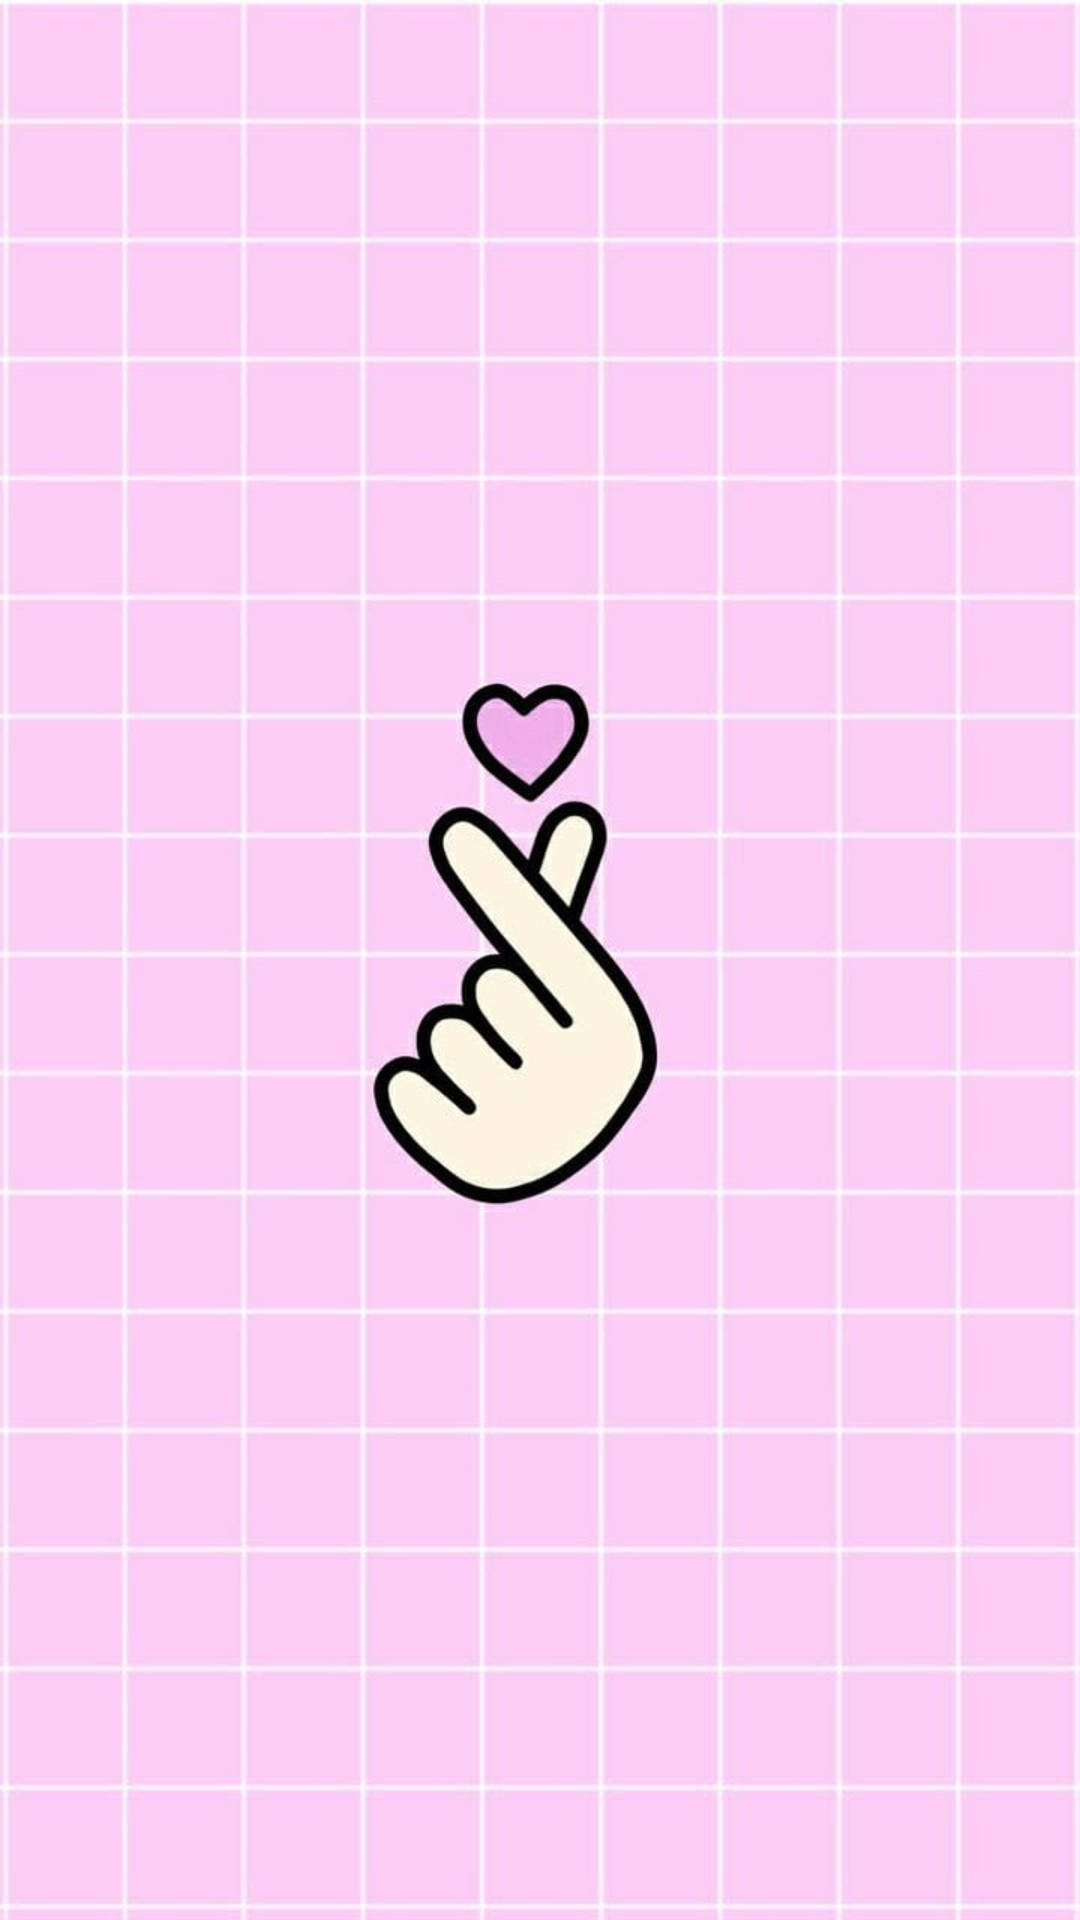 Saranghae Heart On A Pink Grid Picture